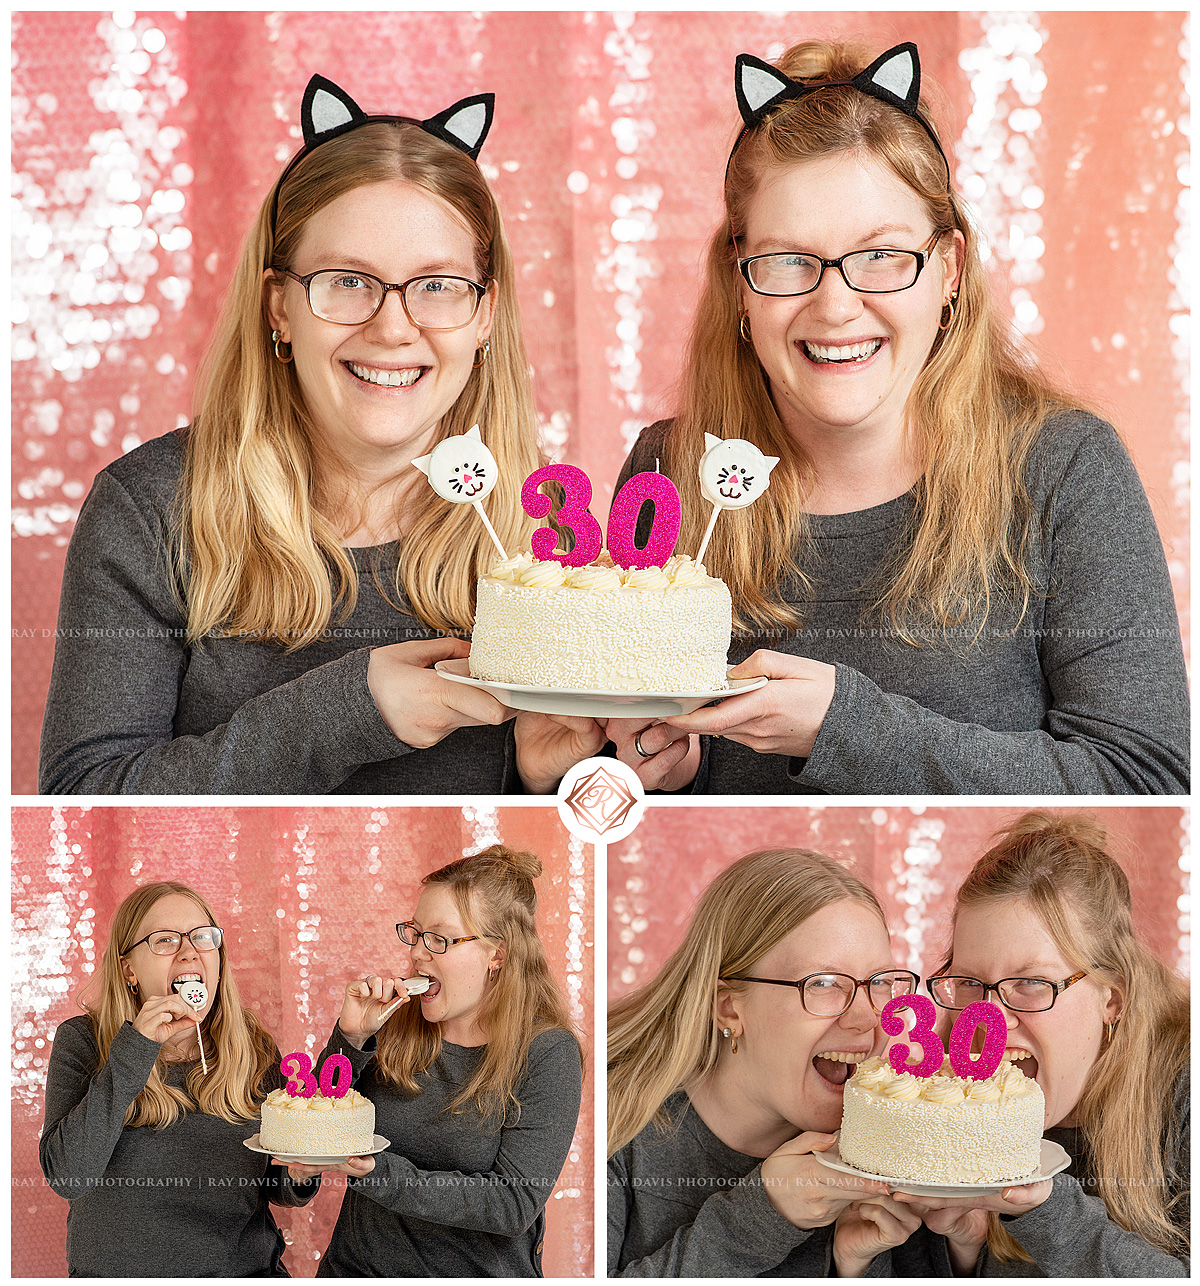 Blond Twins sisters 30th birthday with cat themed set and cake by Ray Davis Photography